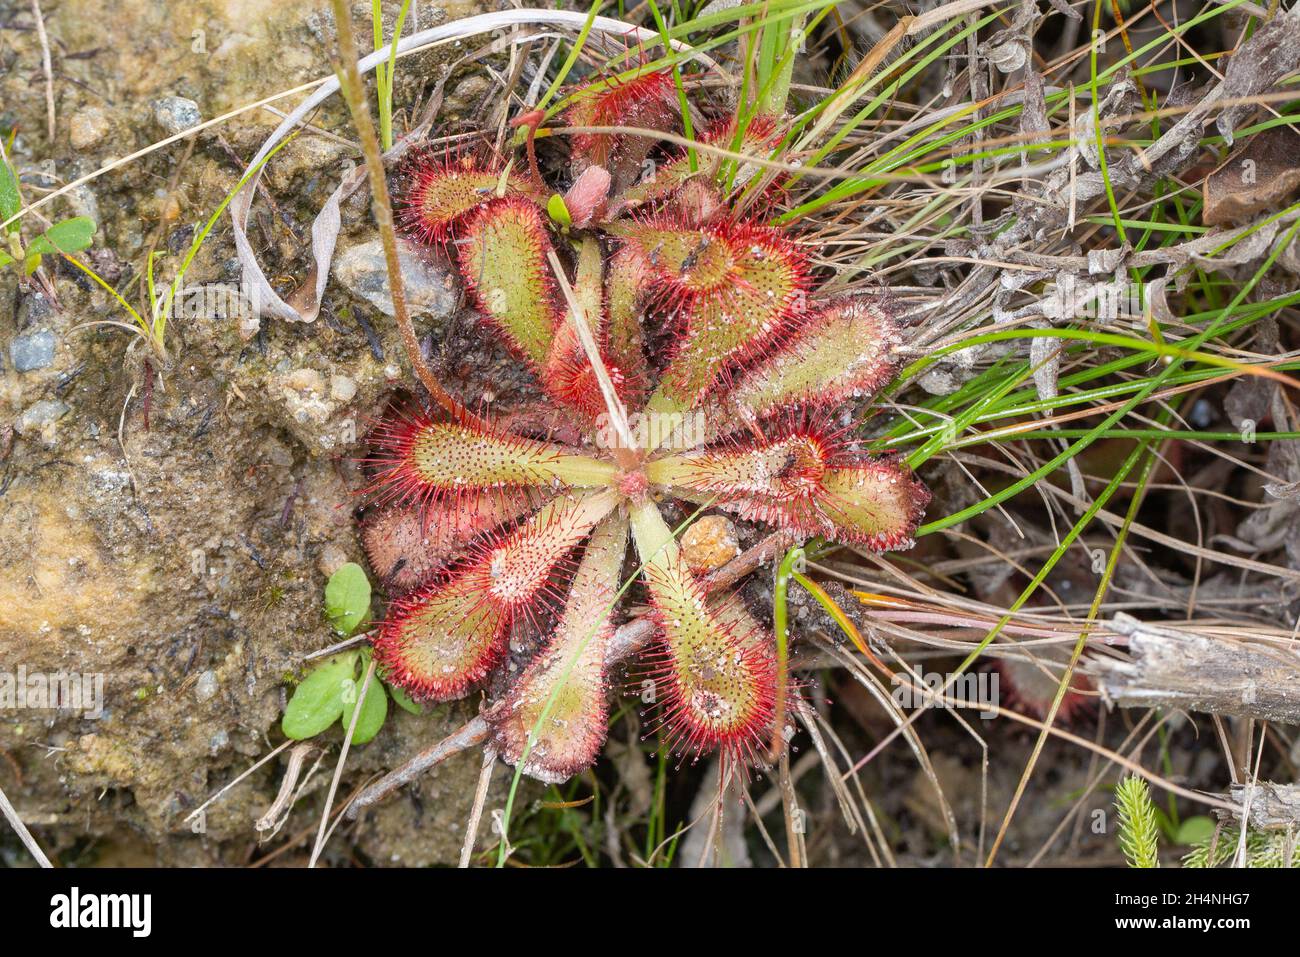 The carnivorous plant Drosera venusta, taken in natural habitat north of George in the Western Cape of South Africa Stock Photo